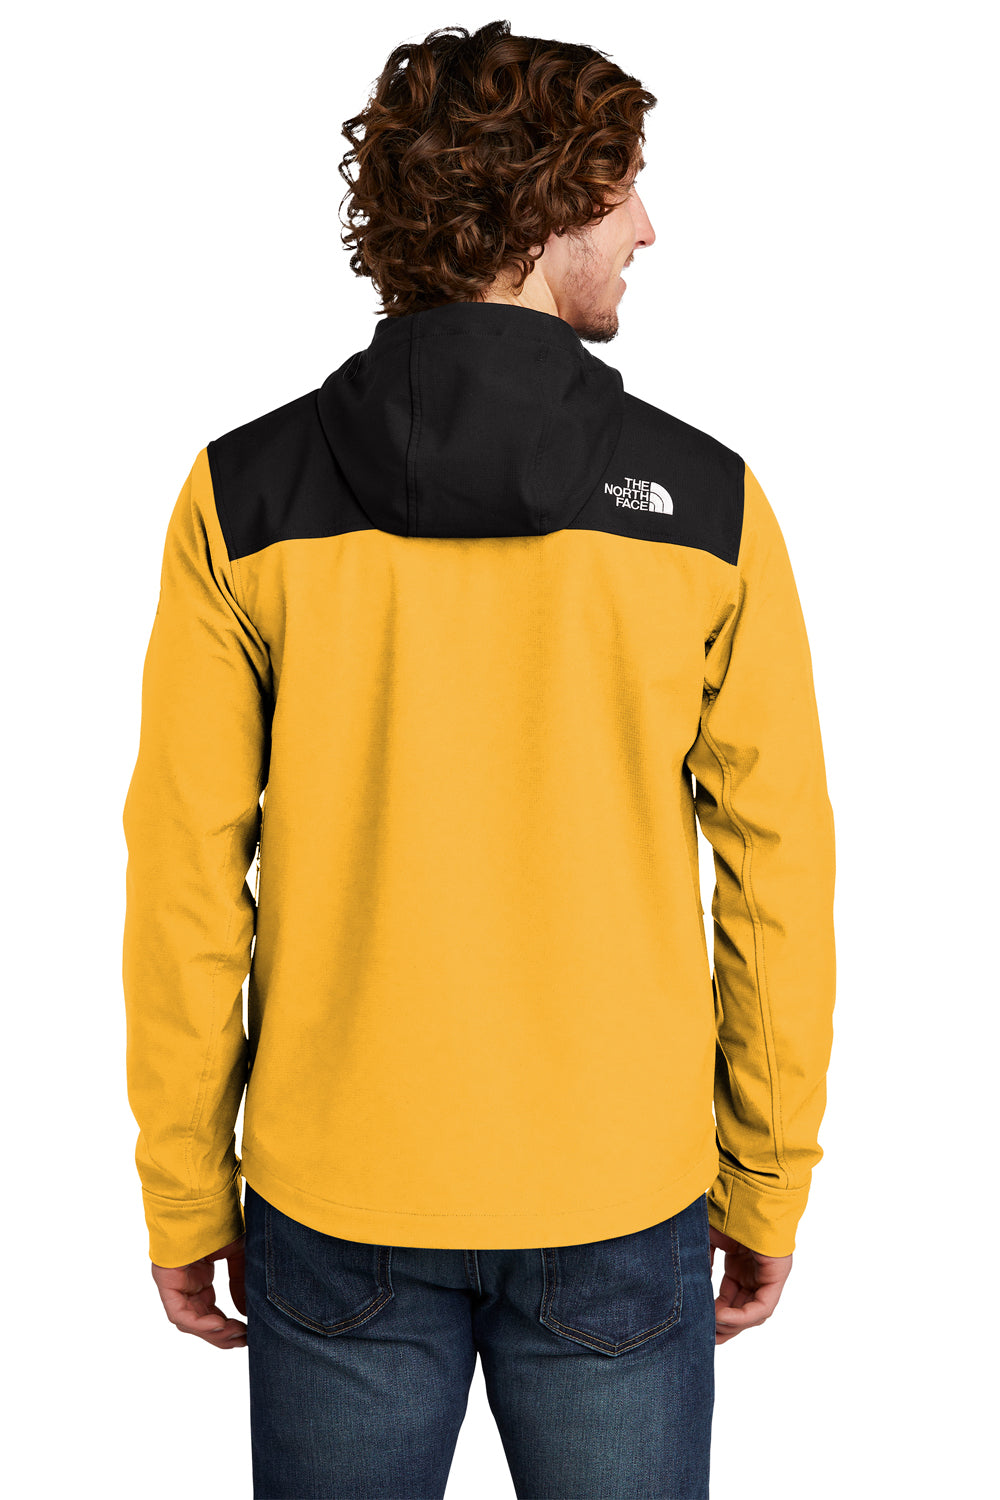 The North Face Mens Castle Rock Full Zip Hooded Jacket Yellow Side